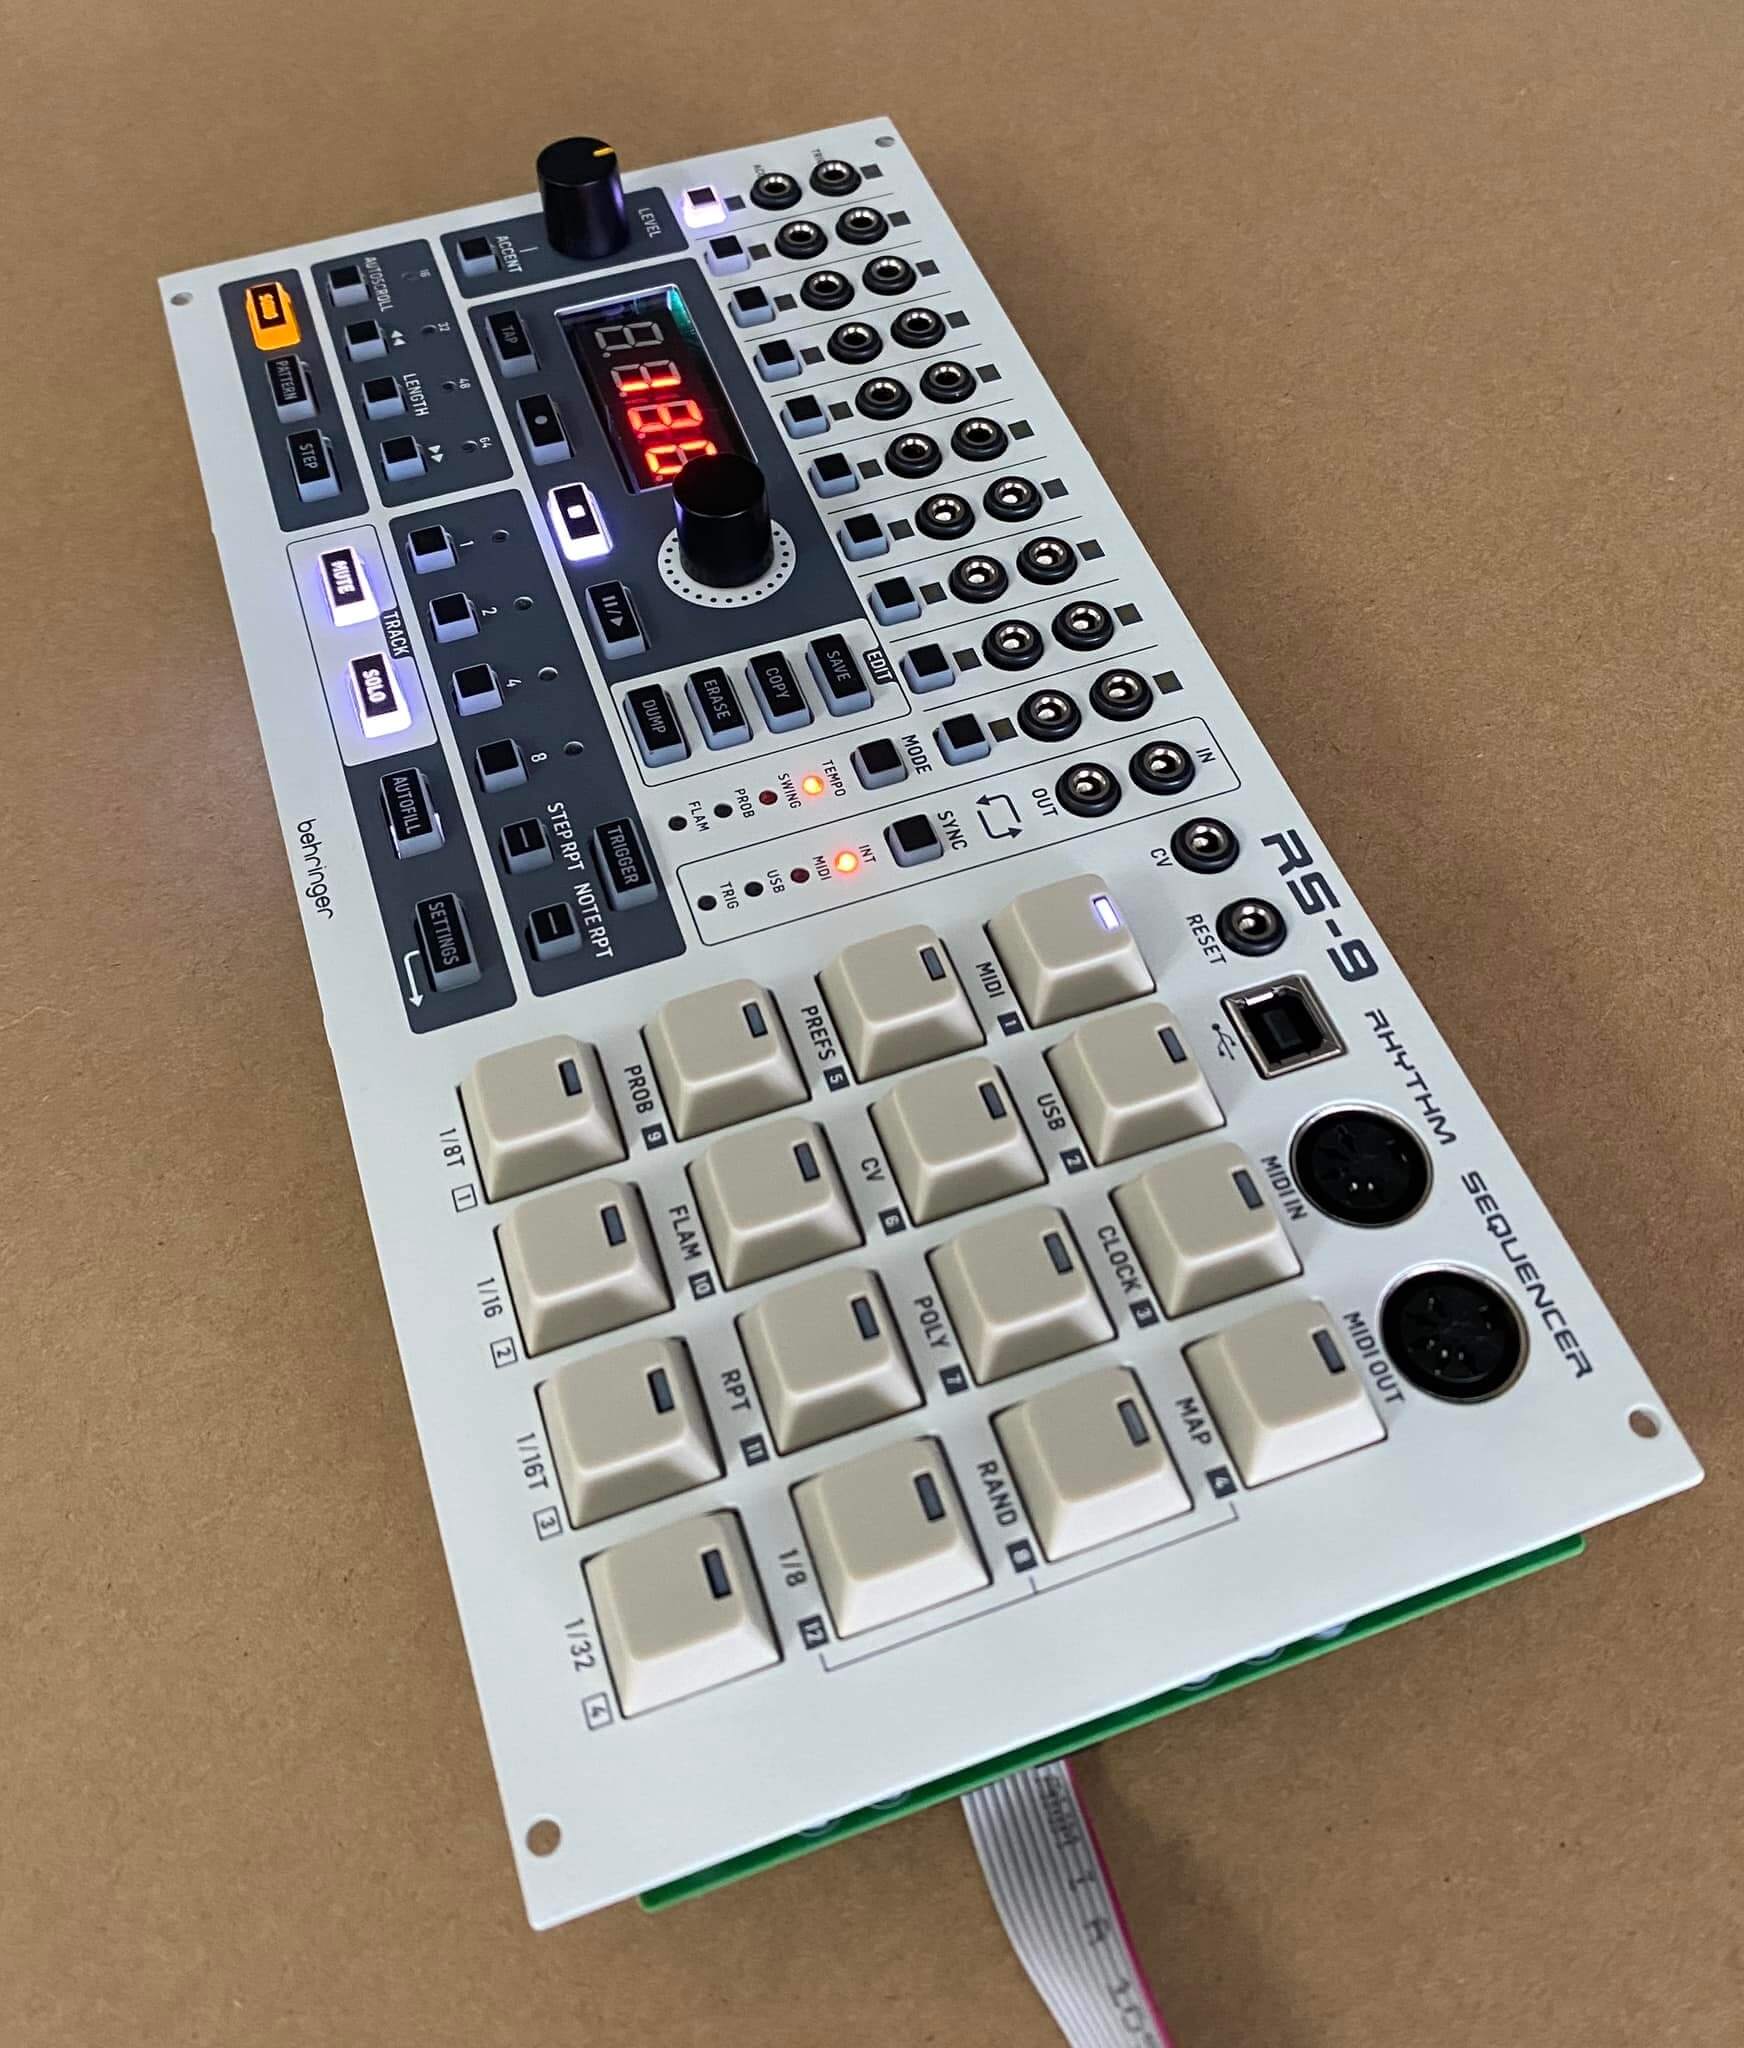 A total of 10 trigger outputs, in addition to accompanying Accent outputs, Sync In/Out, MIDI In/Out on chunky 5-pin DIN and USB sit on the hardware. Furthermore, you